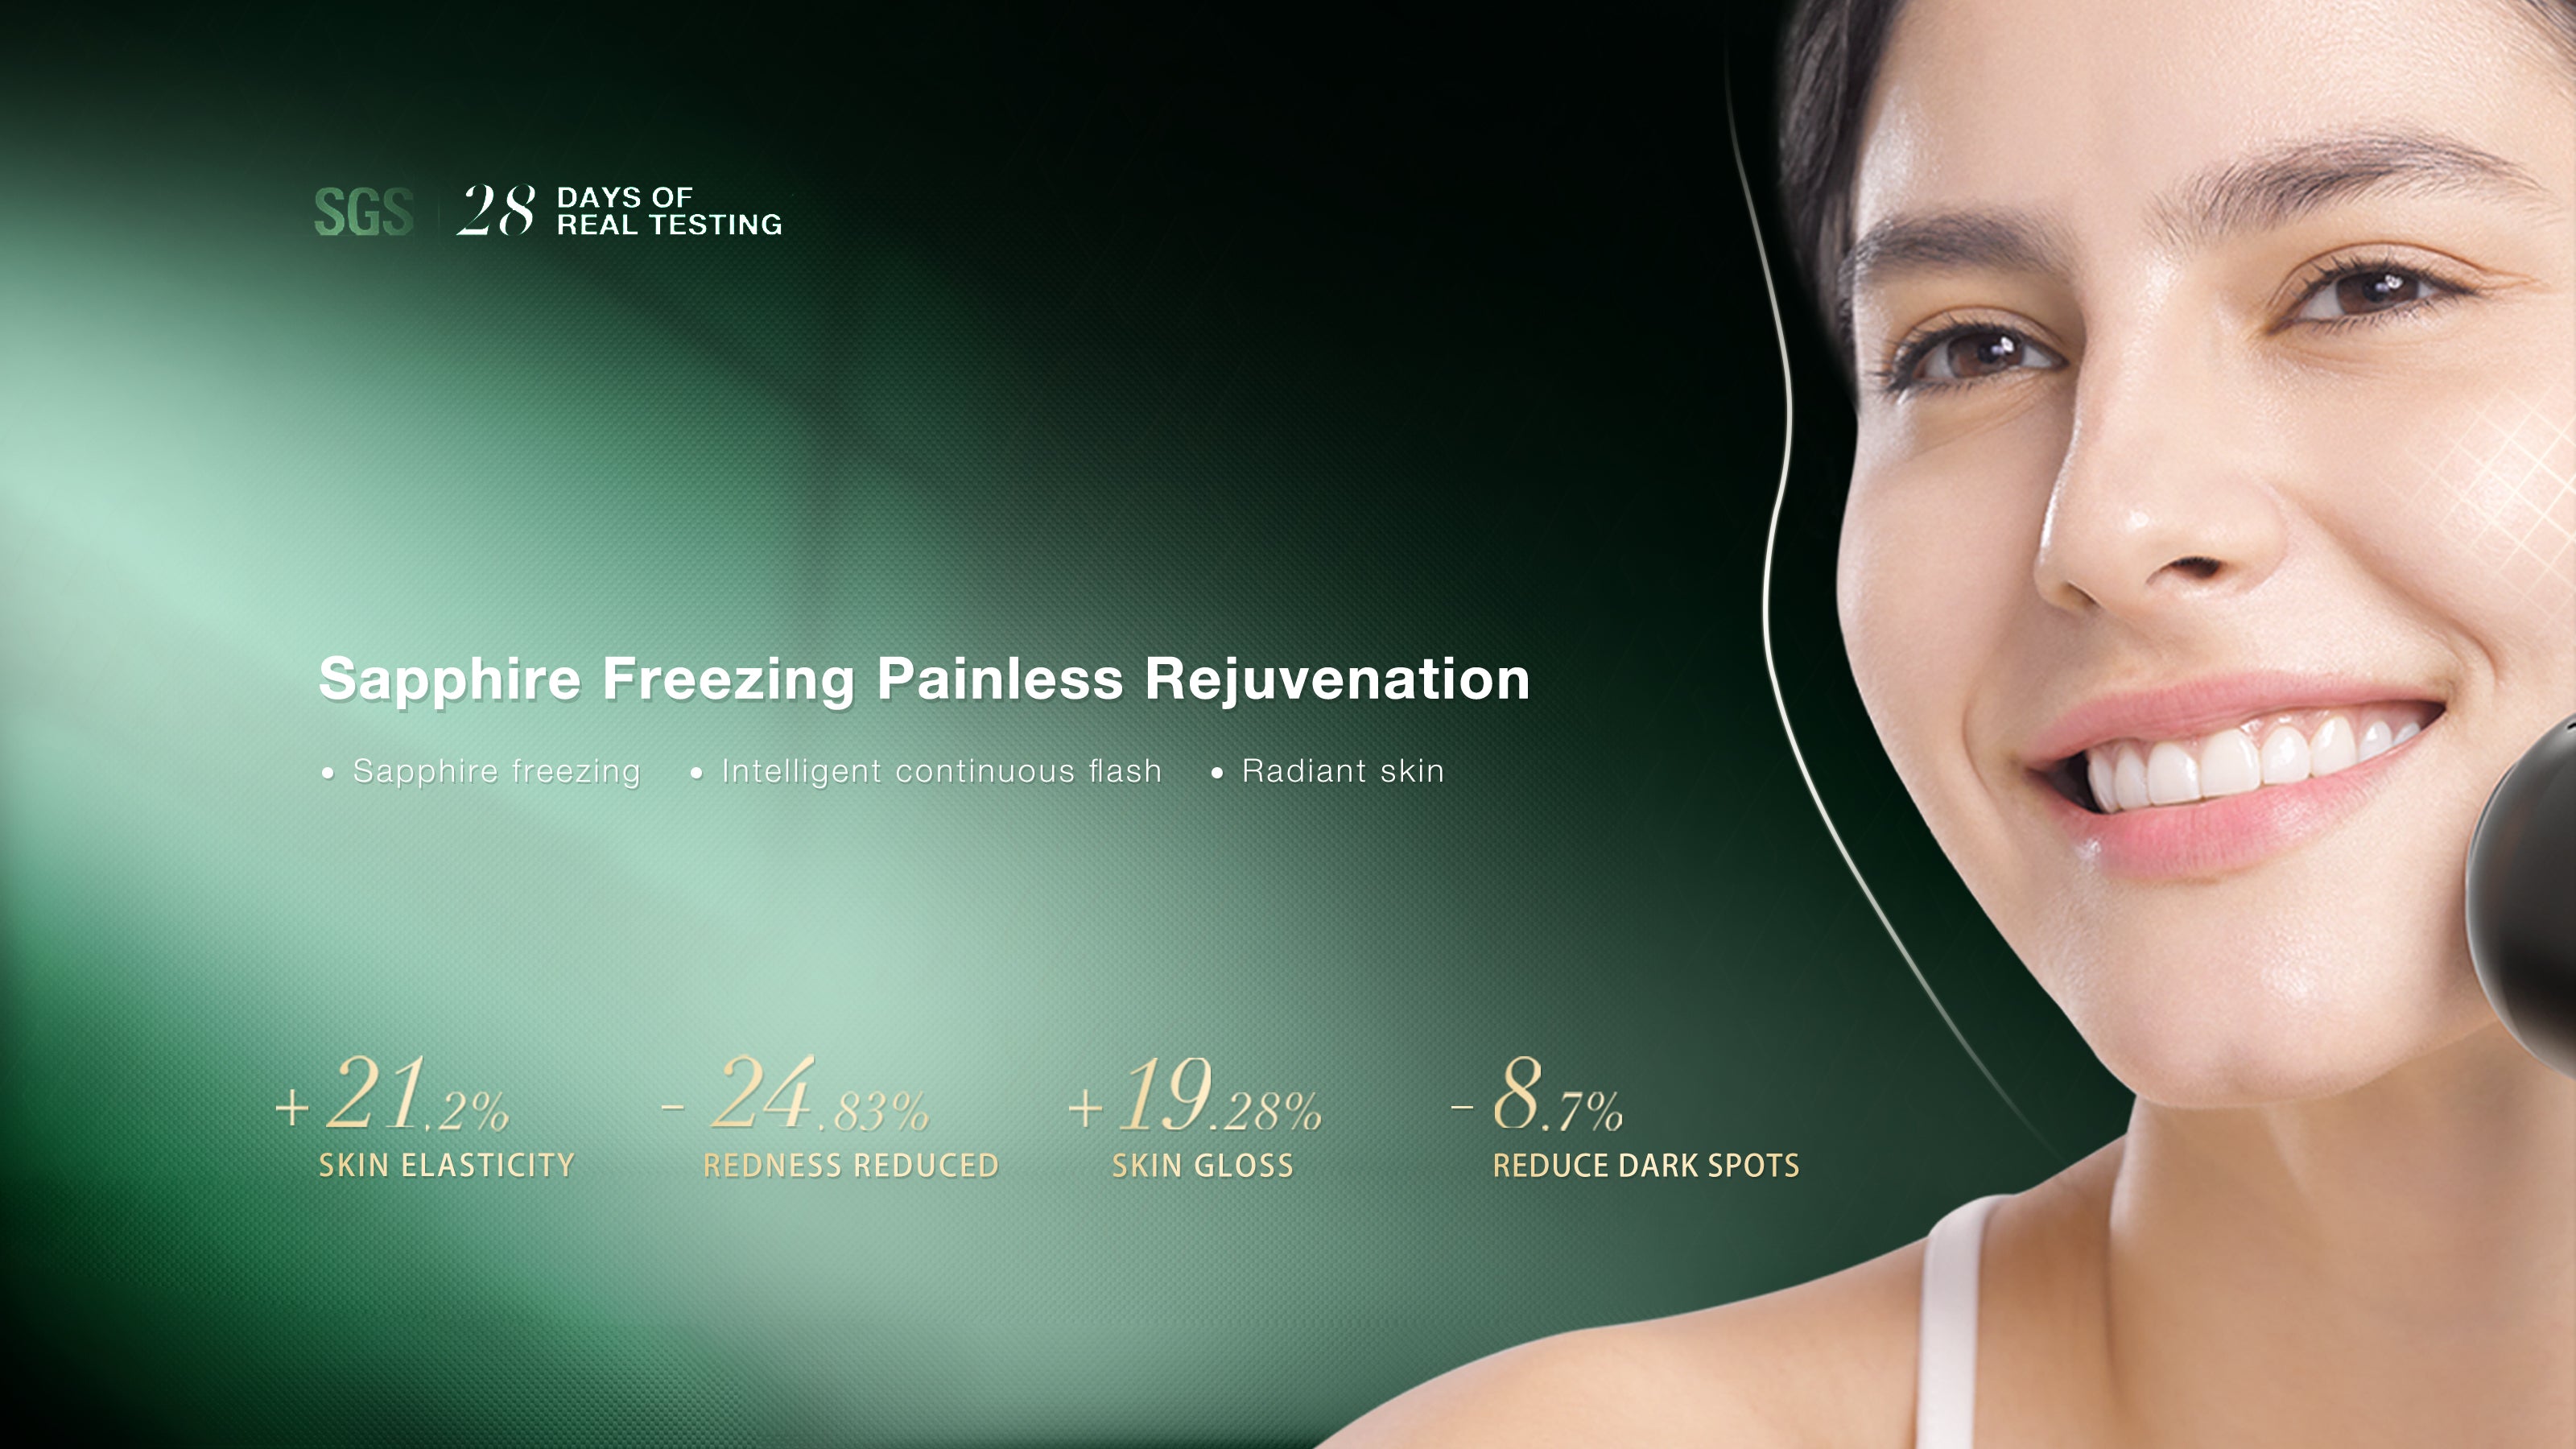 JOVS Blacken PRO DPL Photofacial Skincare Device showcases clinically proven results in 28 days with Sapphire Freezing for painless skin rejuvenation.